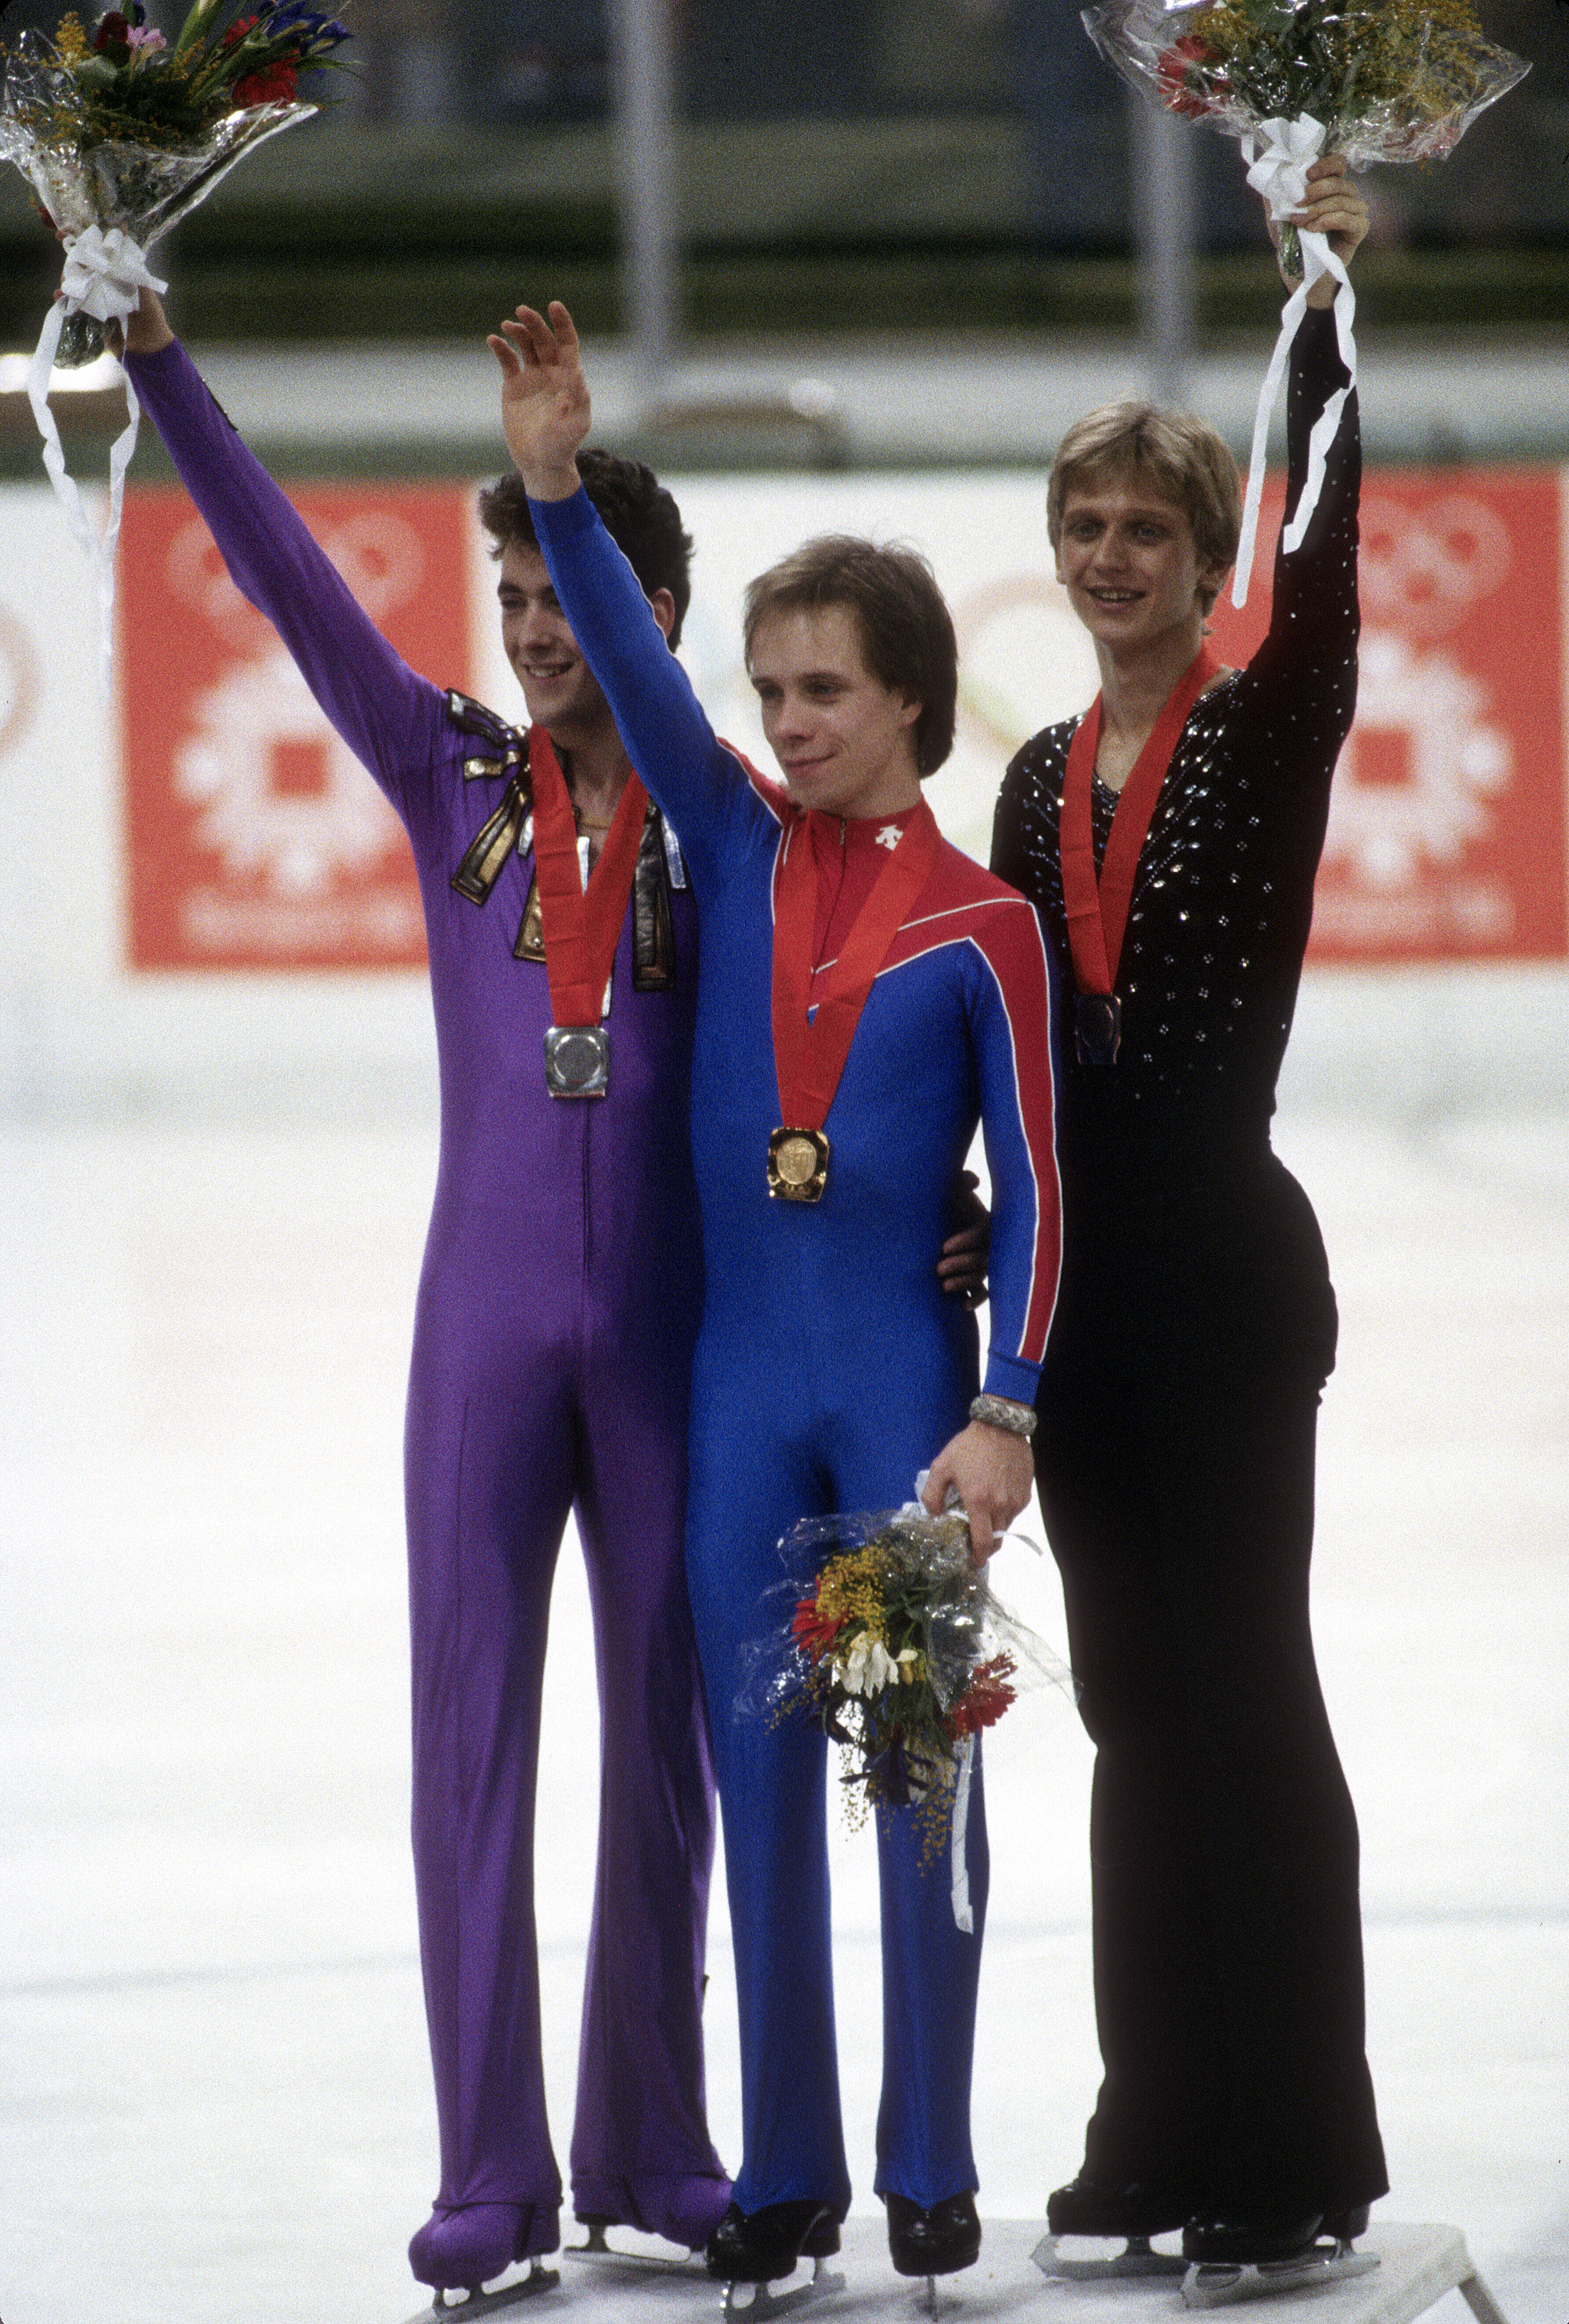 Scott Hamilton during the figure skating competition in the XIV Olympic Winter Games, circa 1984 | Source: Getty Images